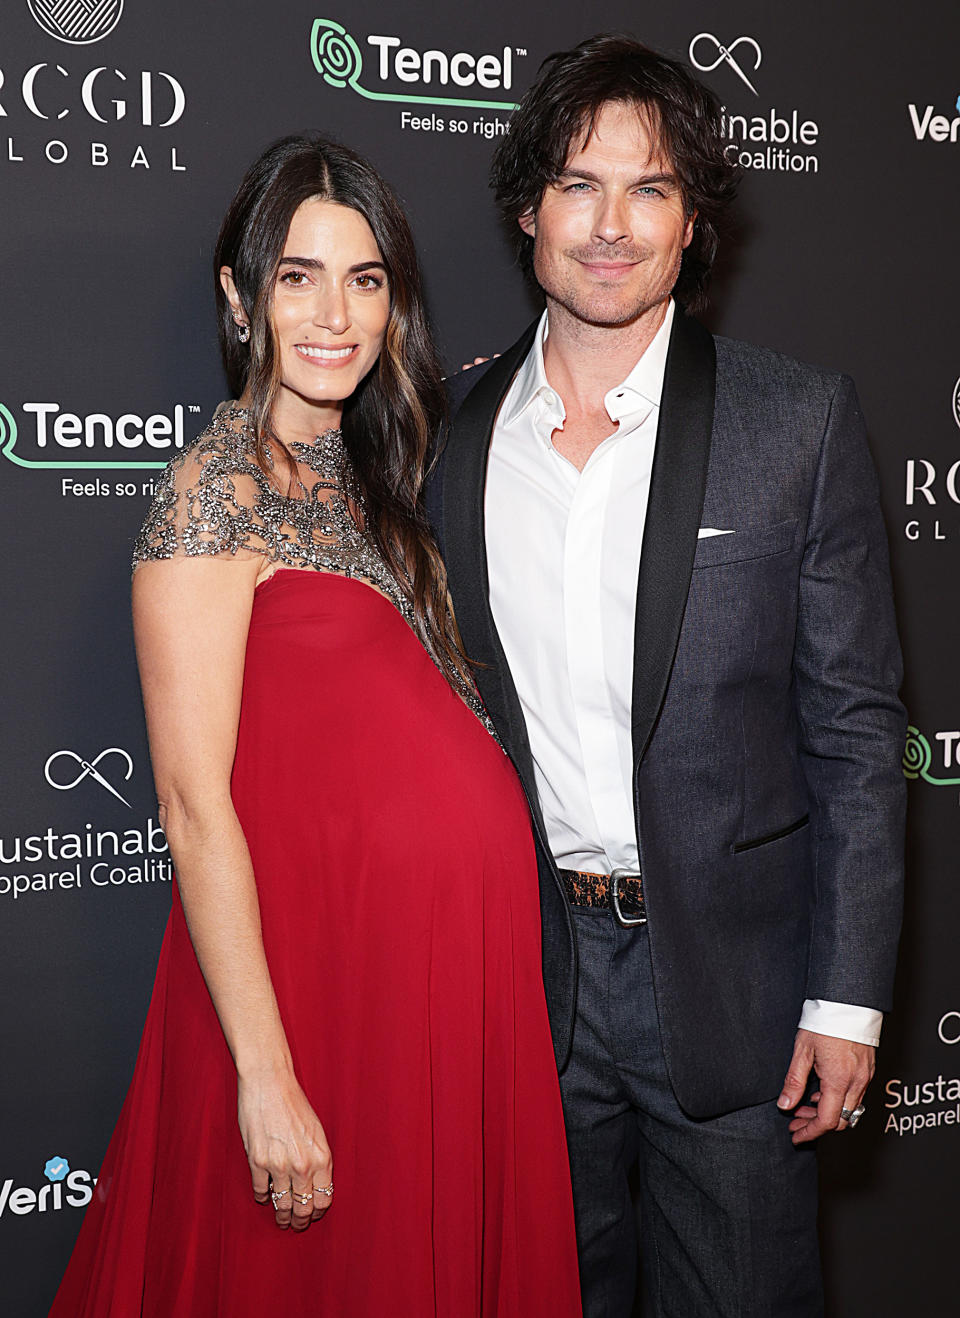 Nikki Reed and Ian Somerhalder at RCGD Global Pre-Oscars annual celebration on March 09, 2023 in West Hollywood, CA. (Momodu Mansaray / Getty Images)